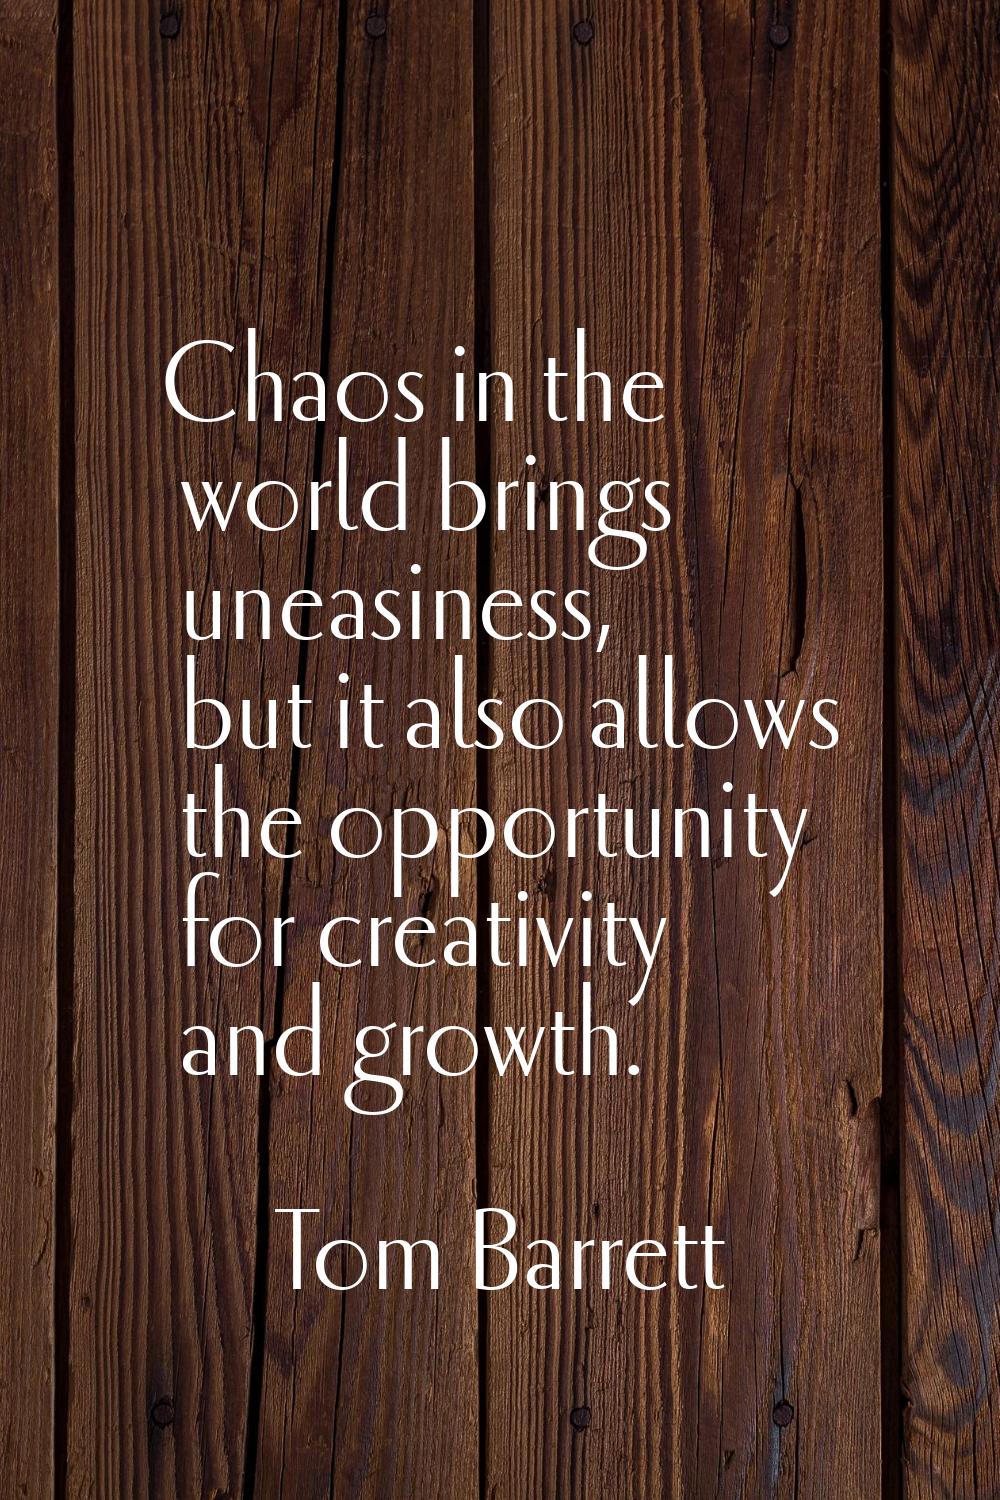 Chaos in the world brings uneasiness, but it also allows the opportunity for creativity and growth.